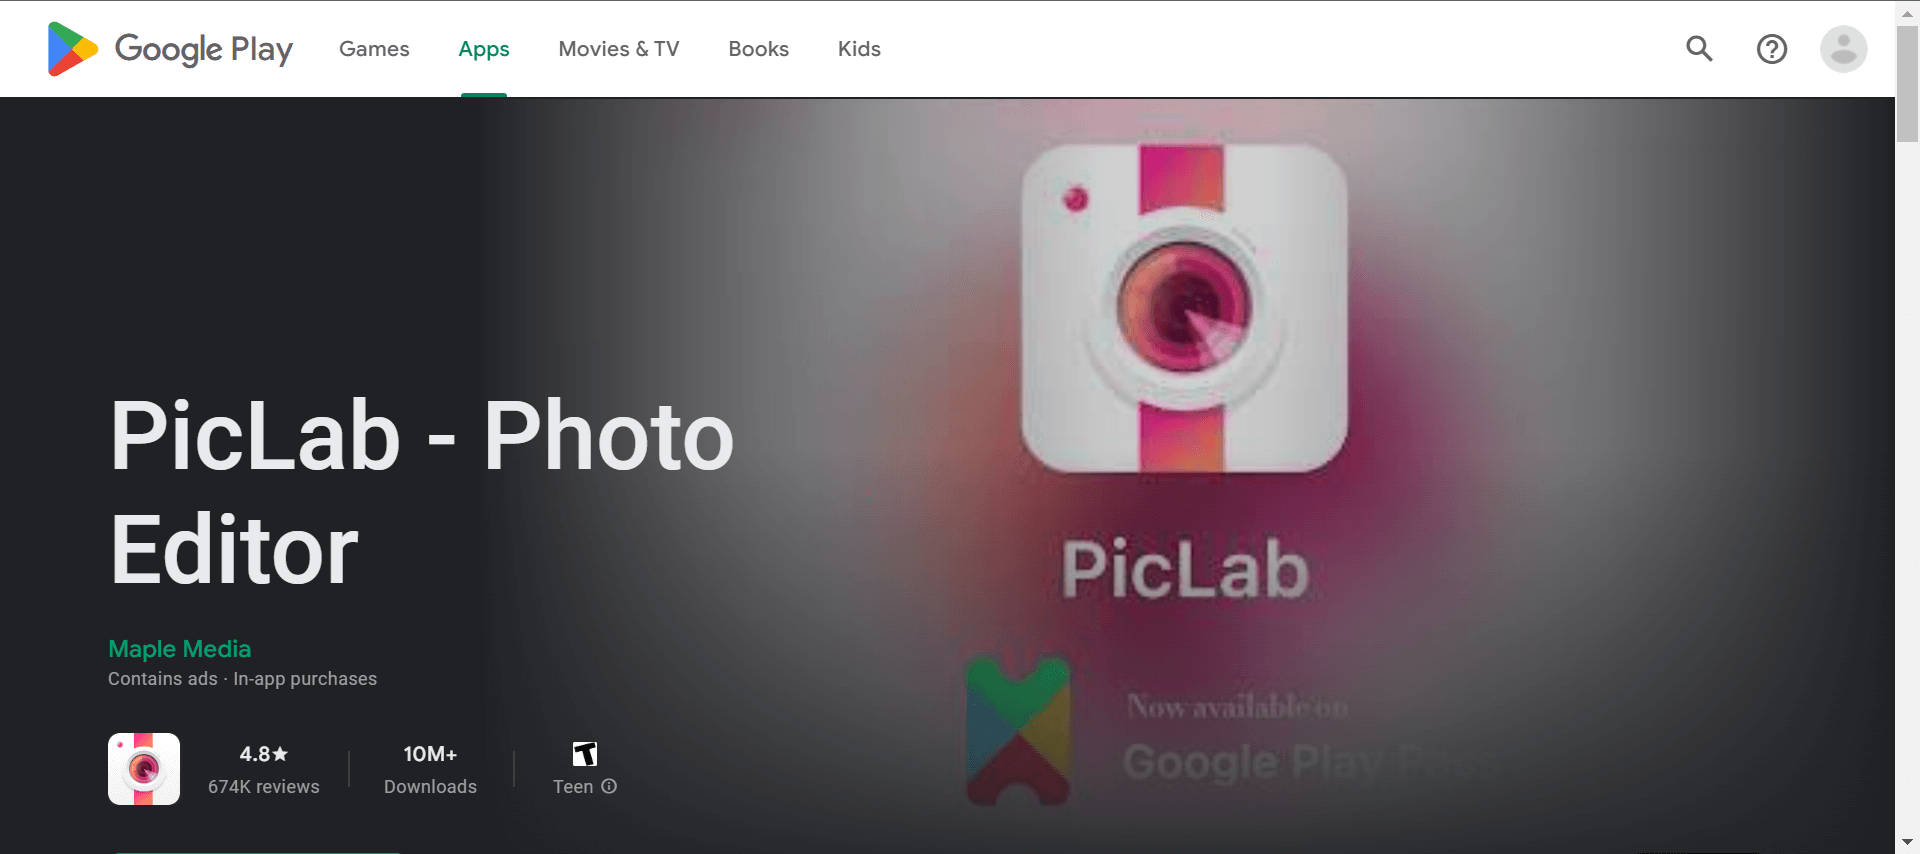 PicLab.'s website